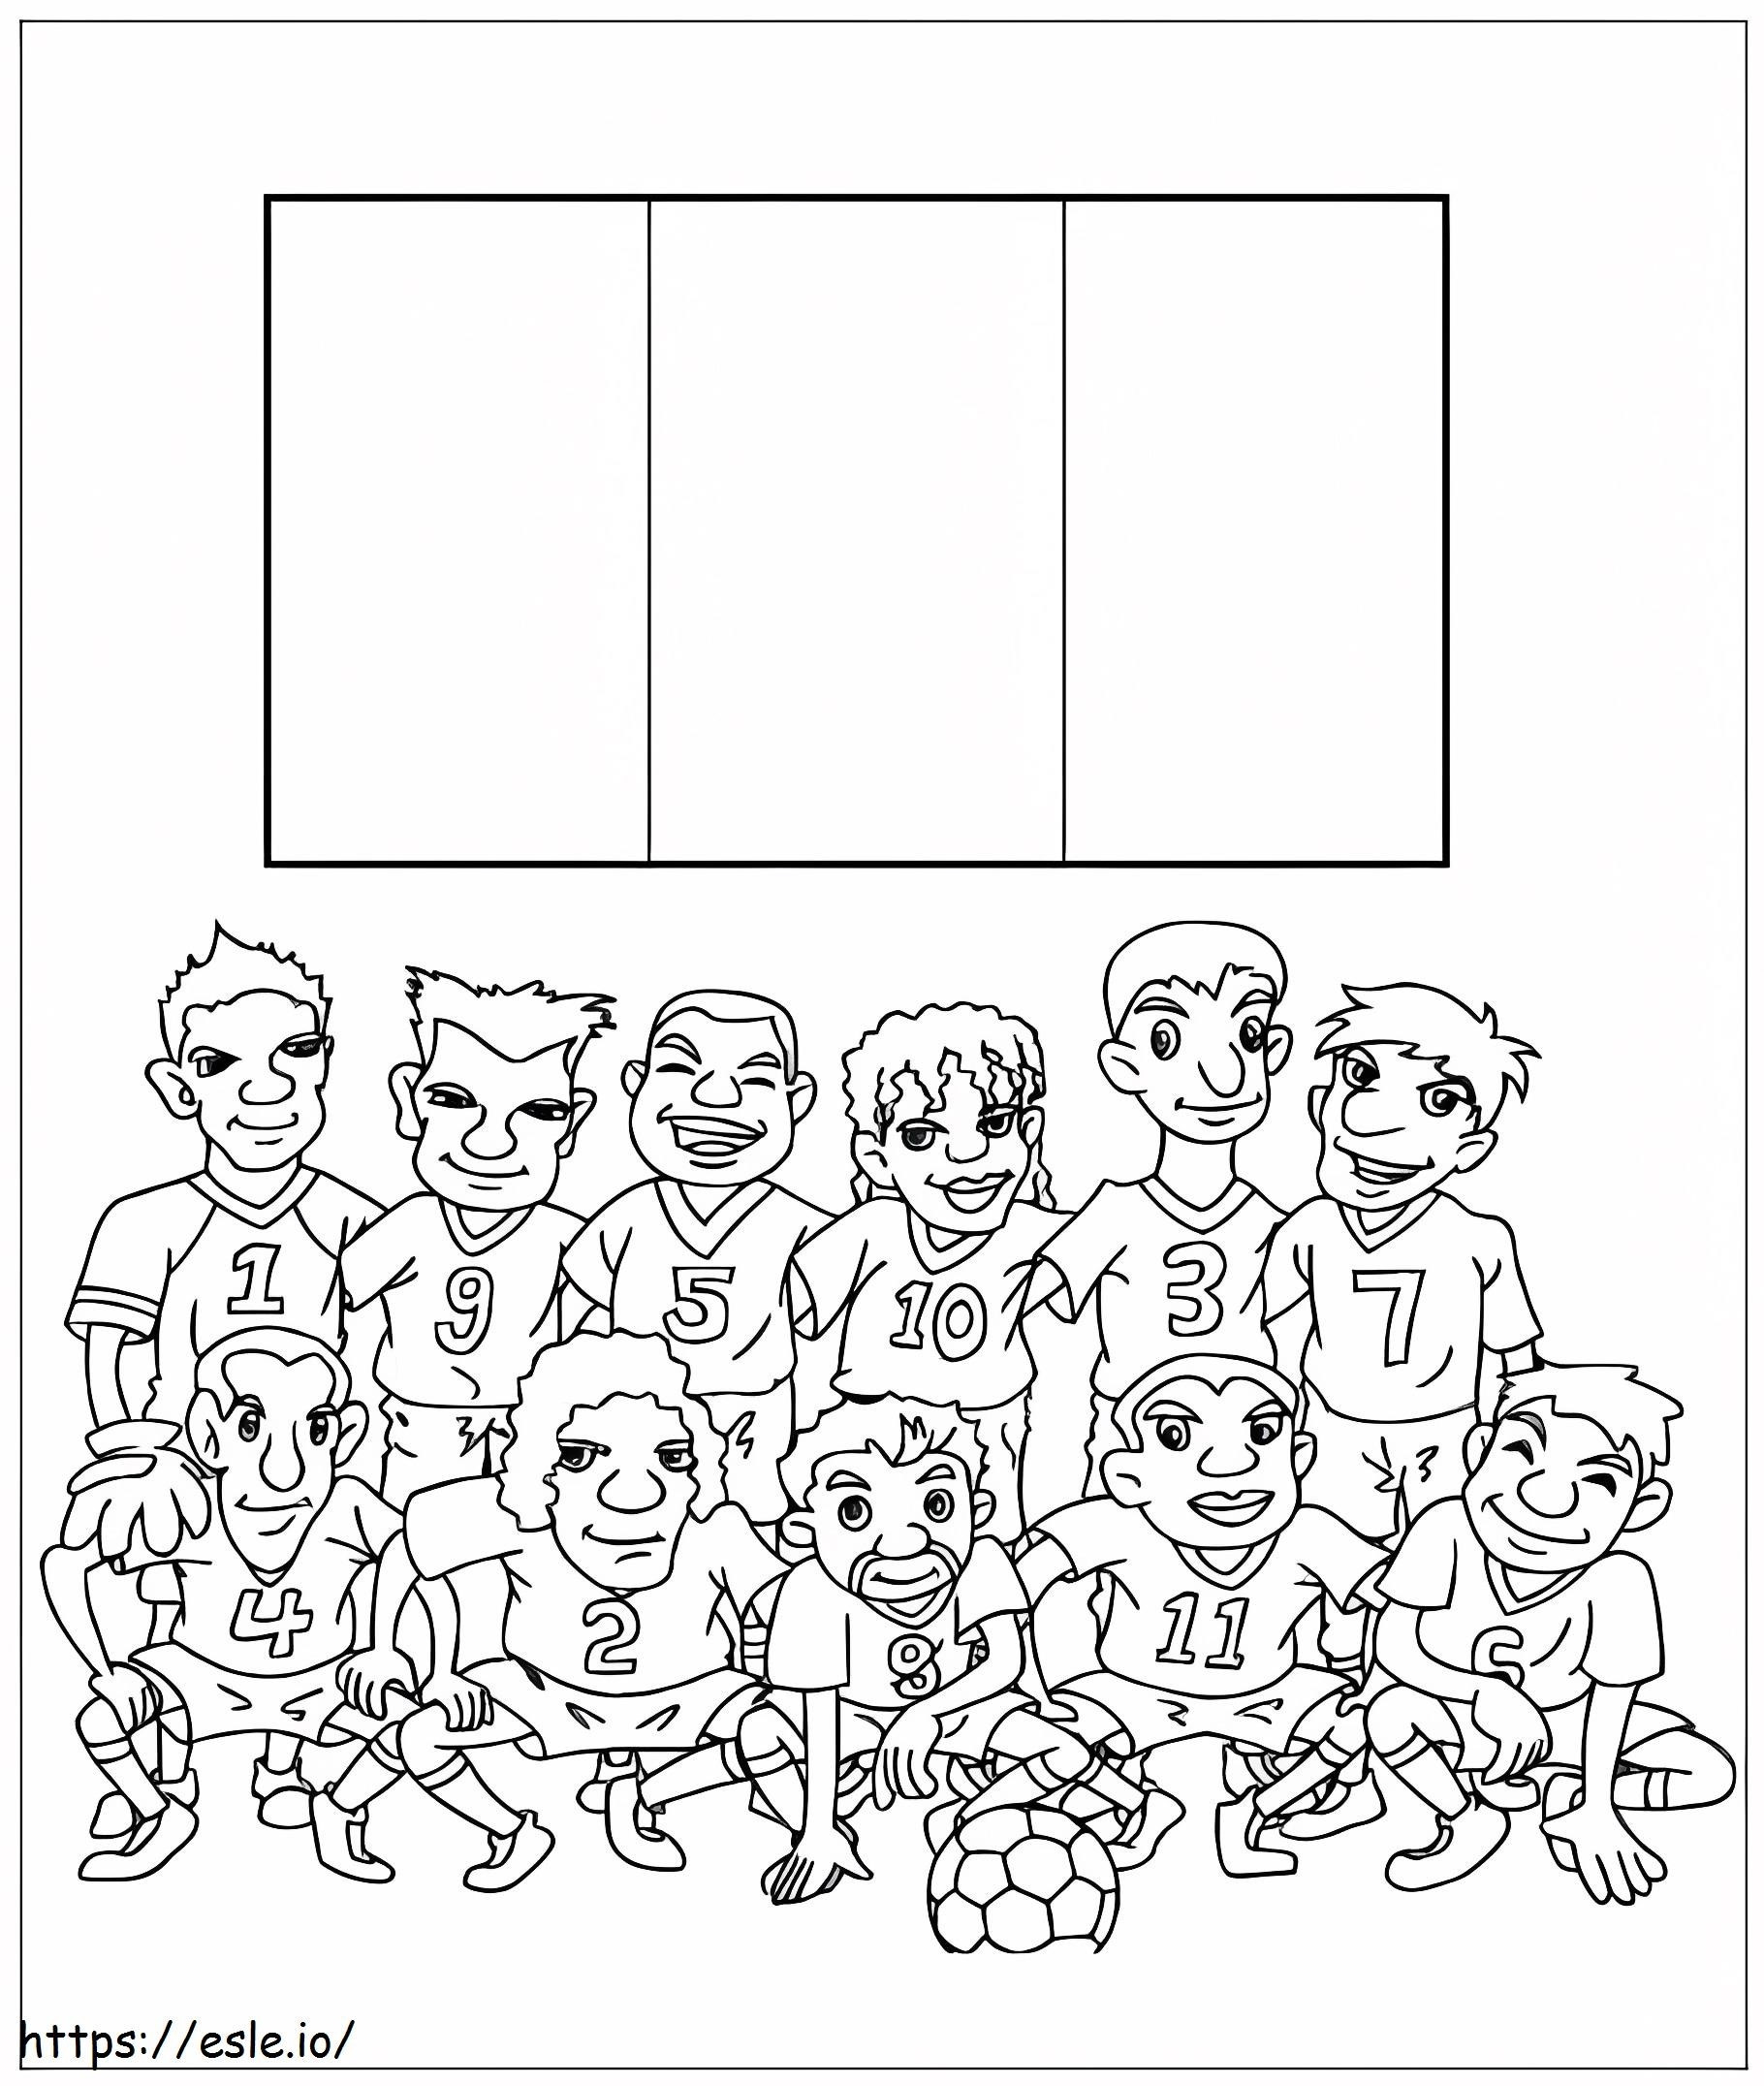 Team Of Belgium coloring page